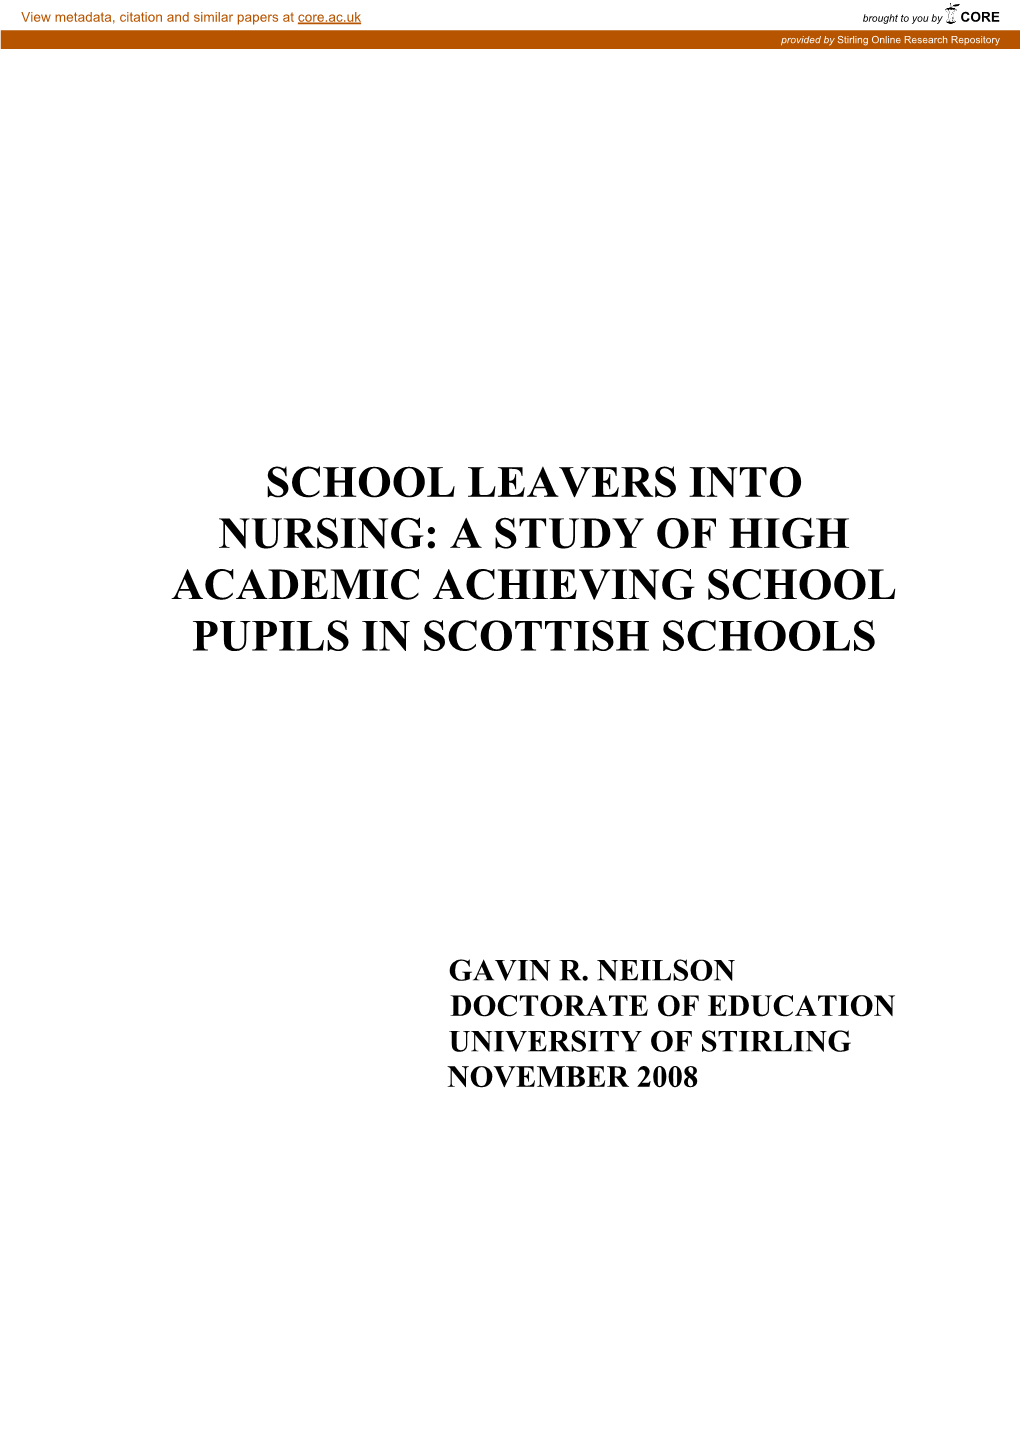 School Leavers Into Nursing a Study of High Academic Achieving